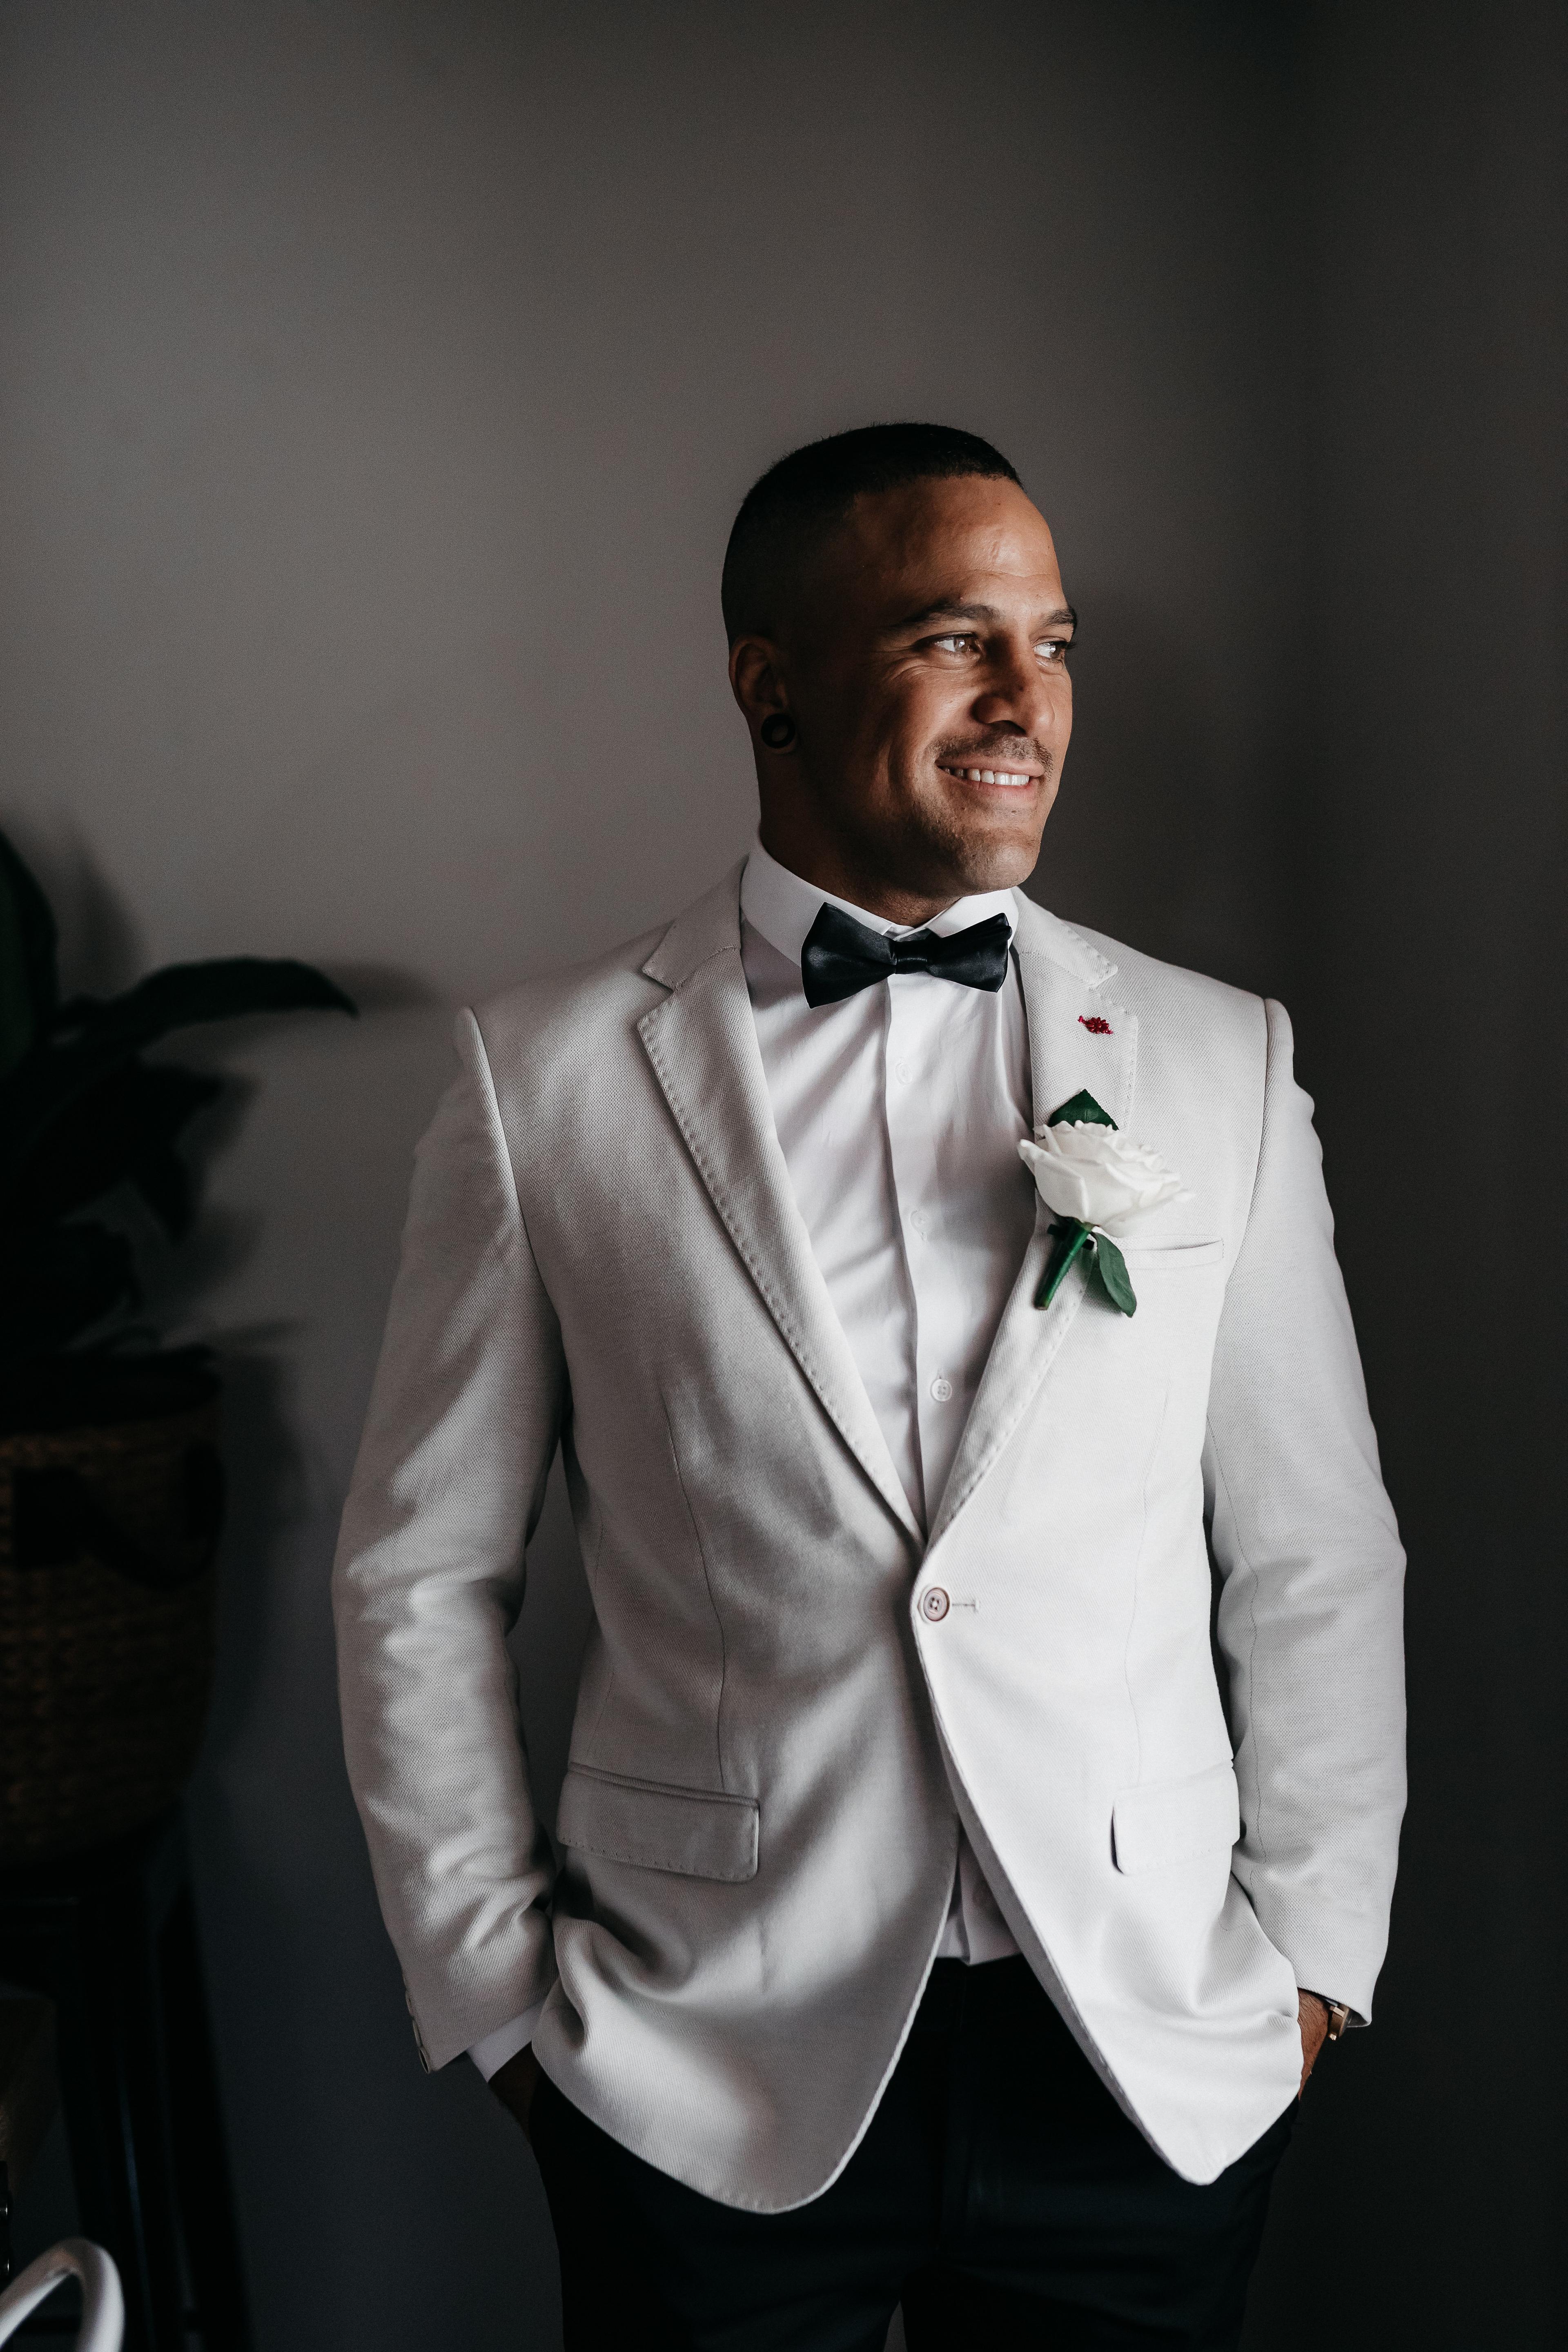 Groom in a white suit at his wedding shot in Perth